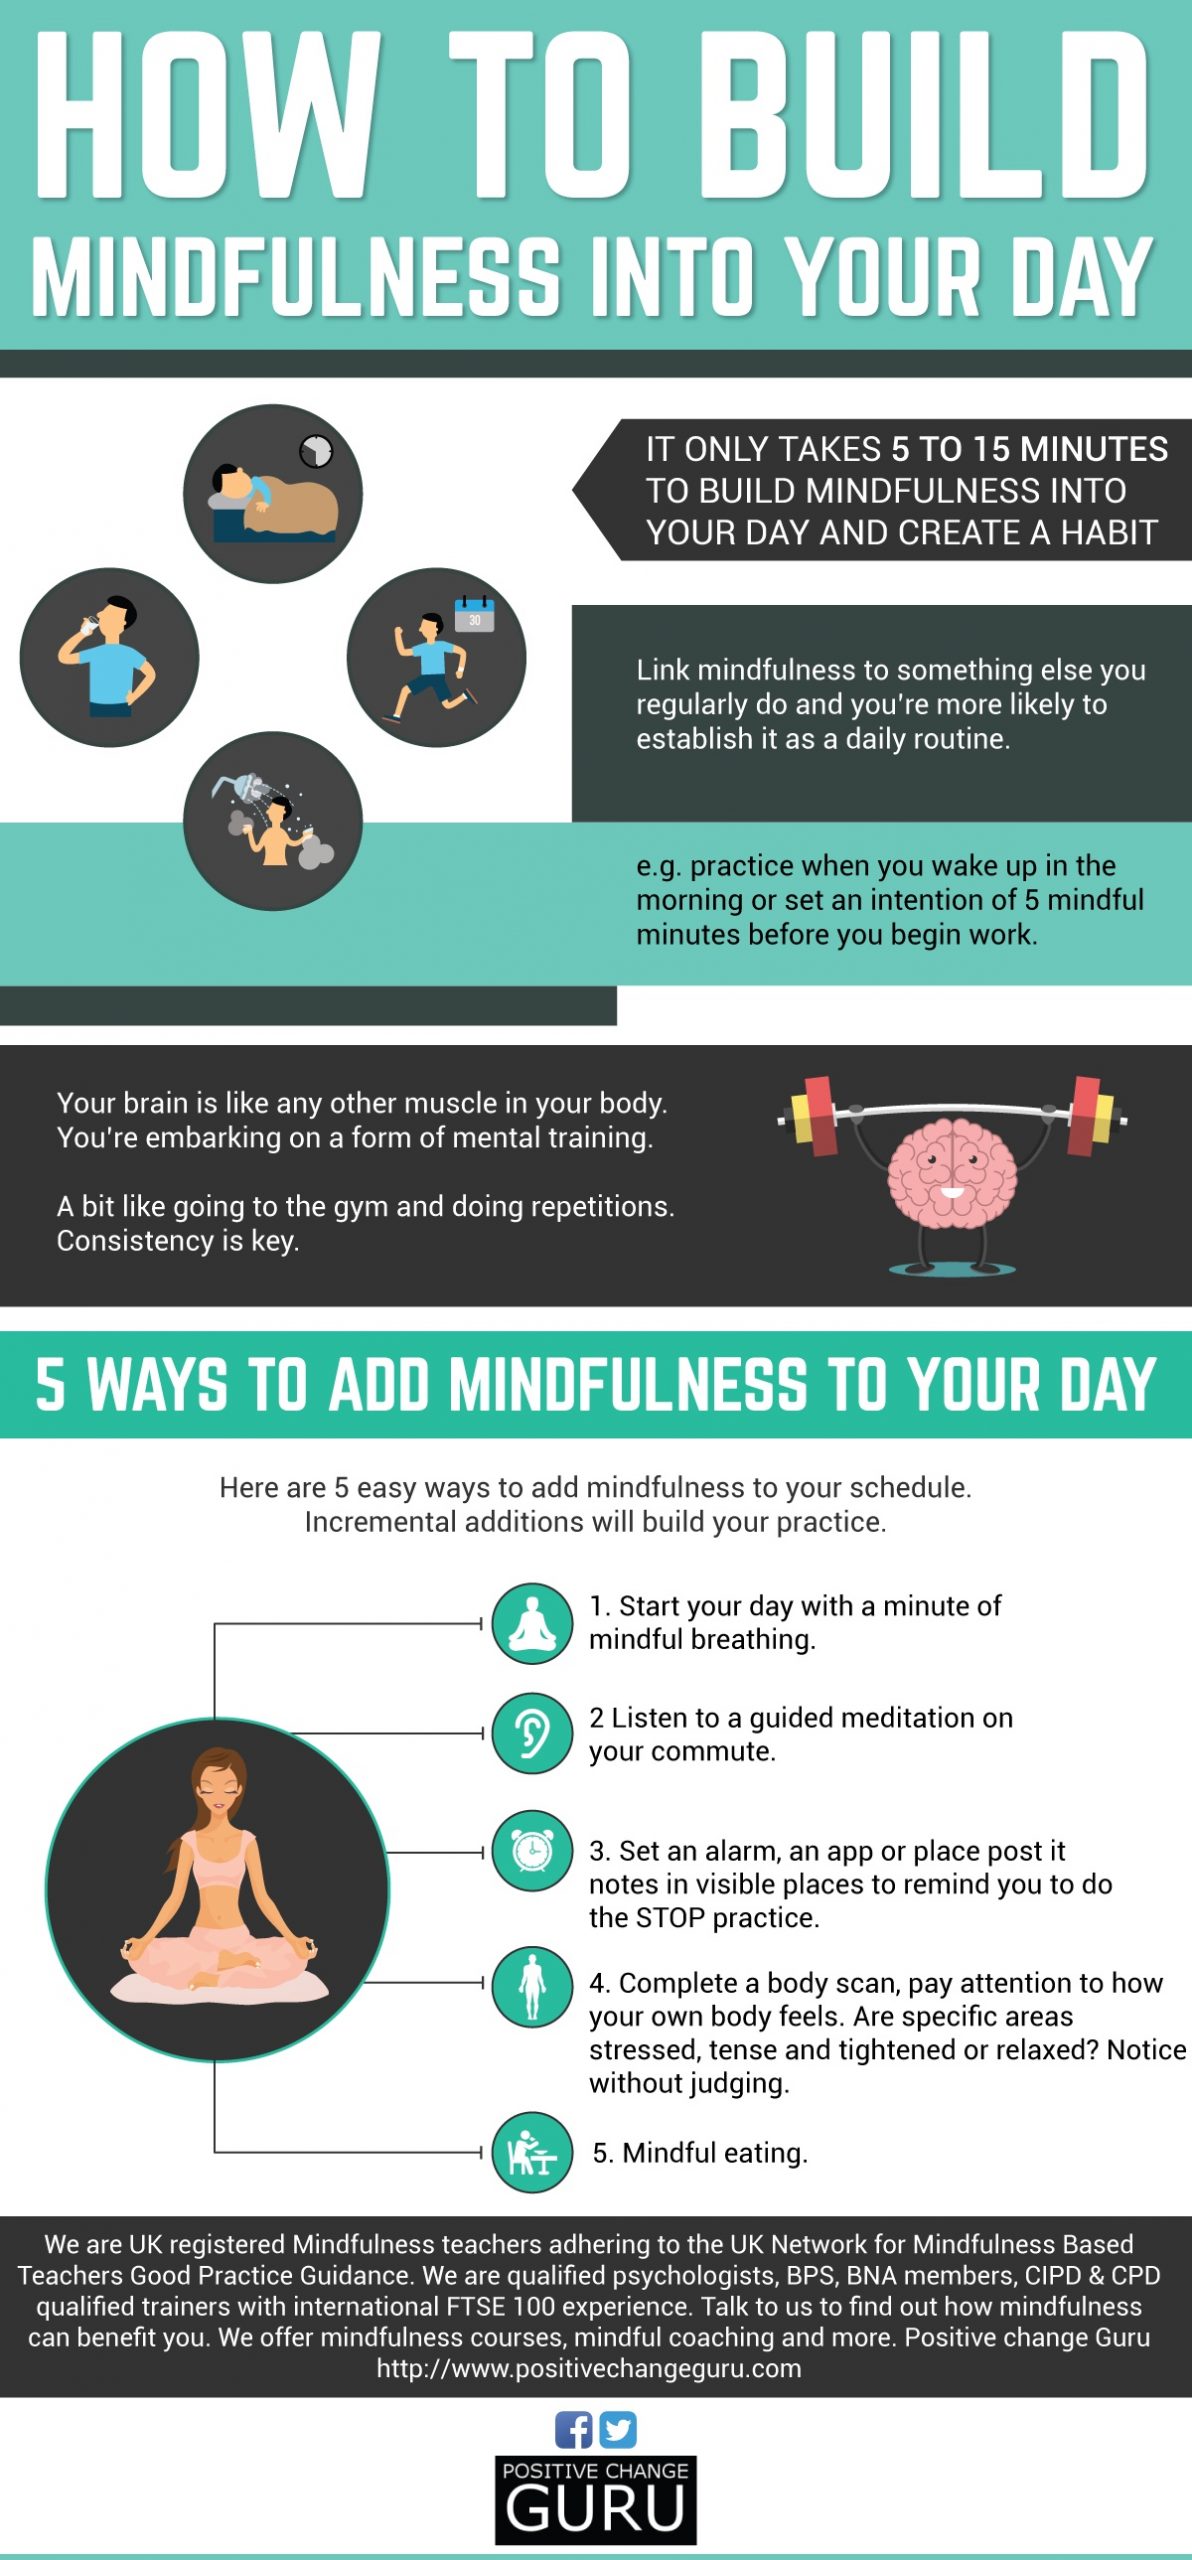 How to build mindfulness into your day